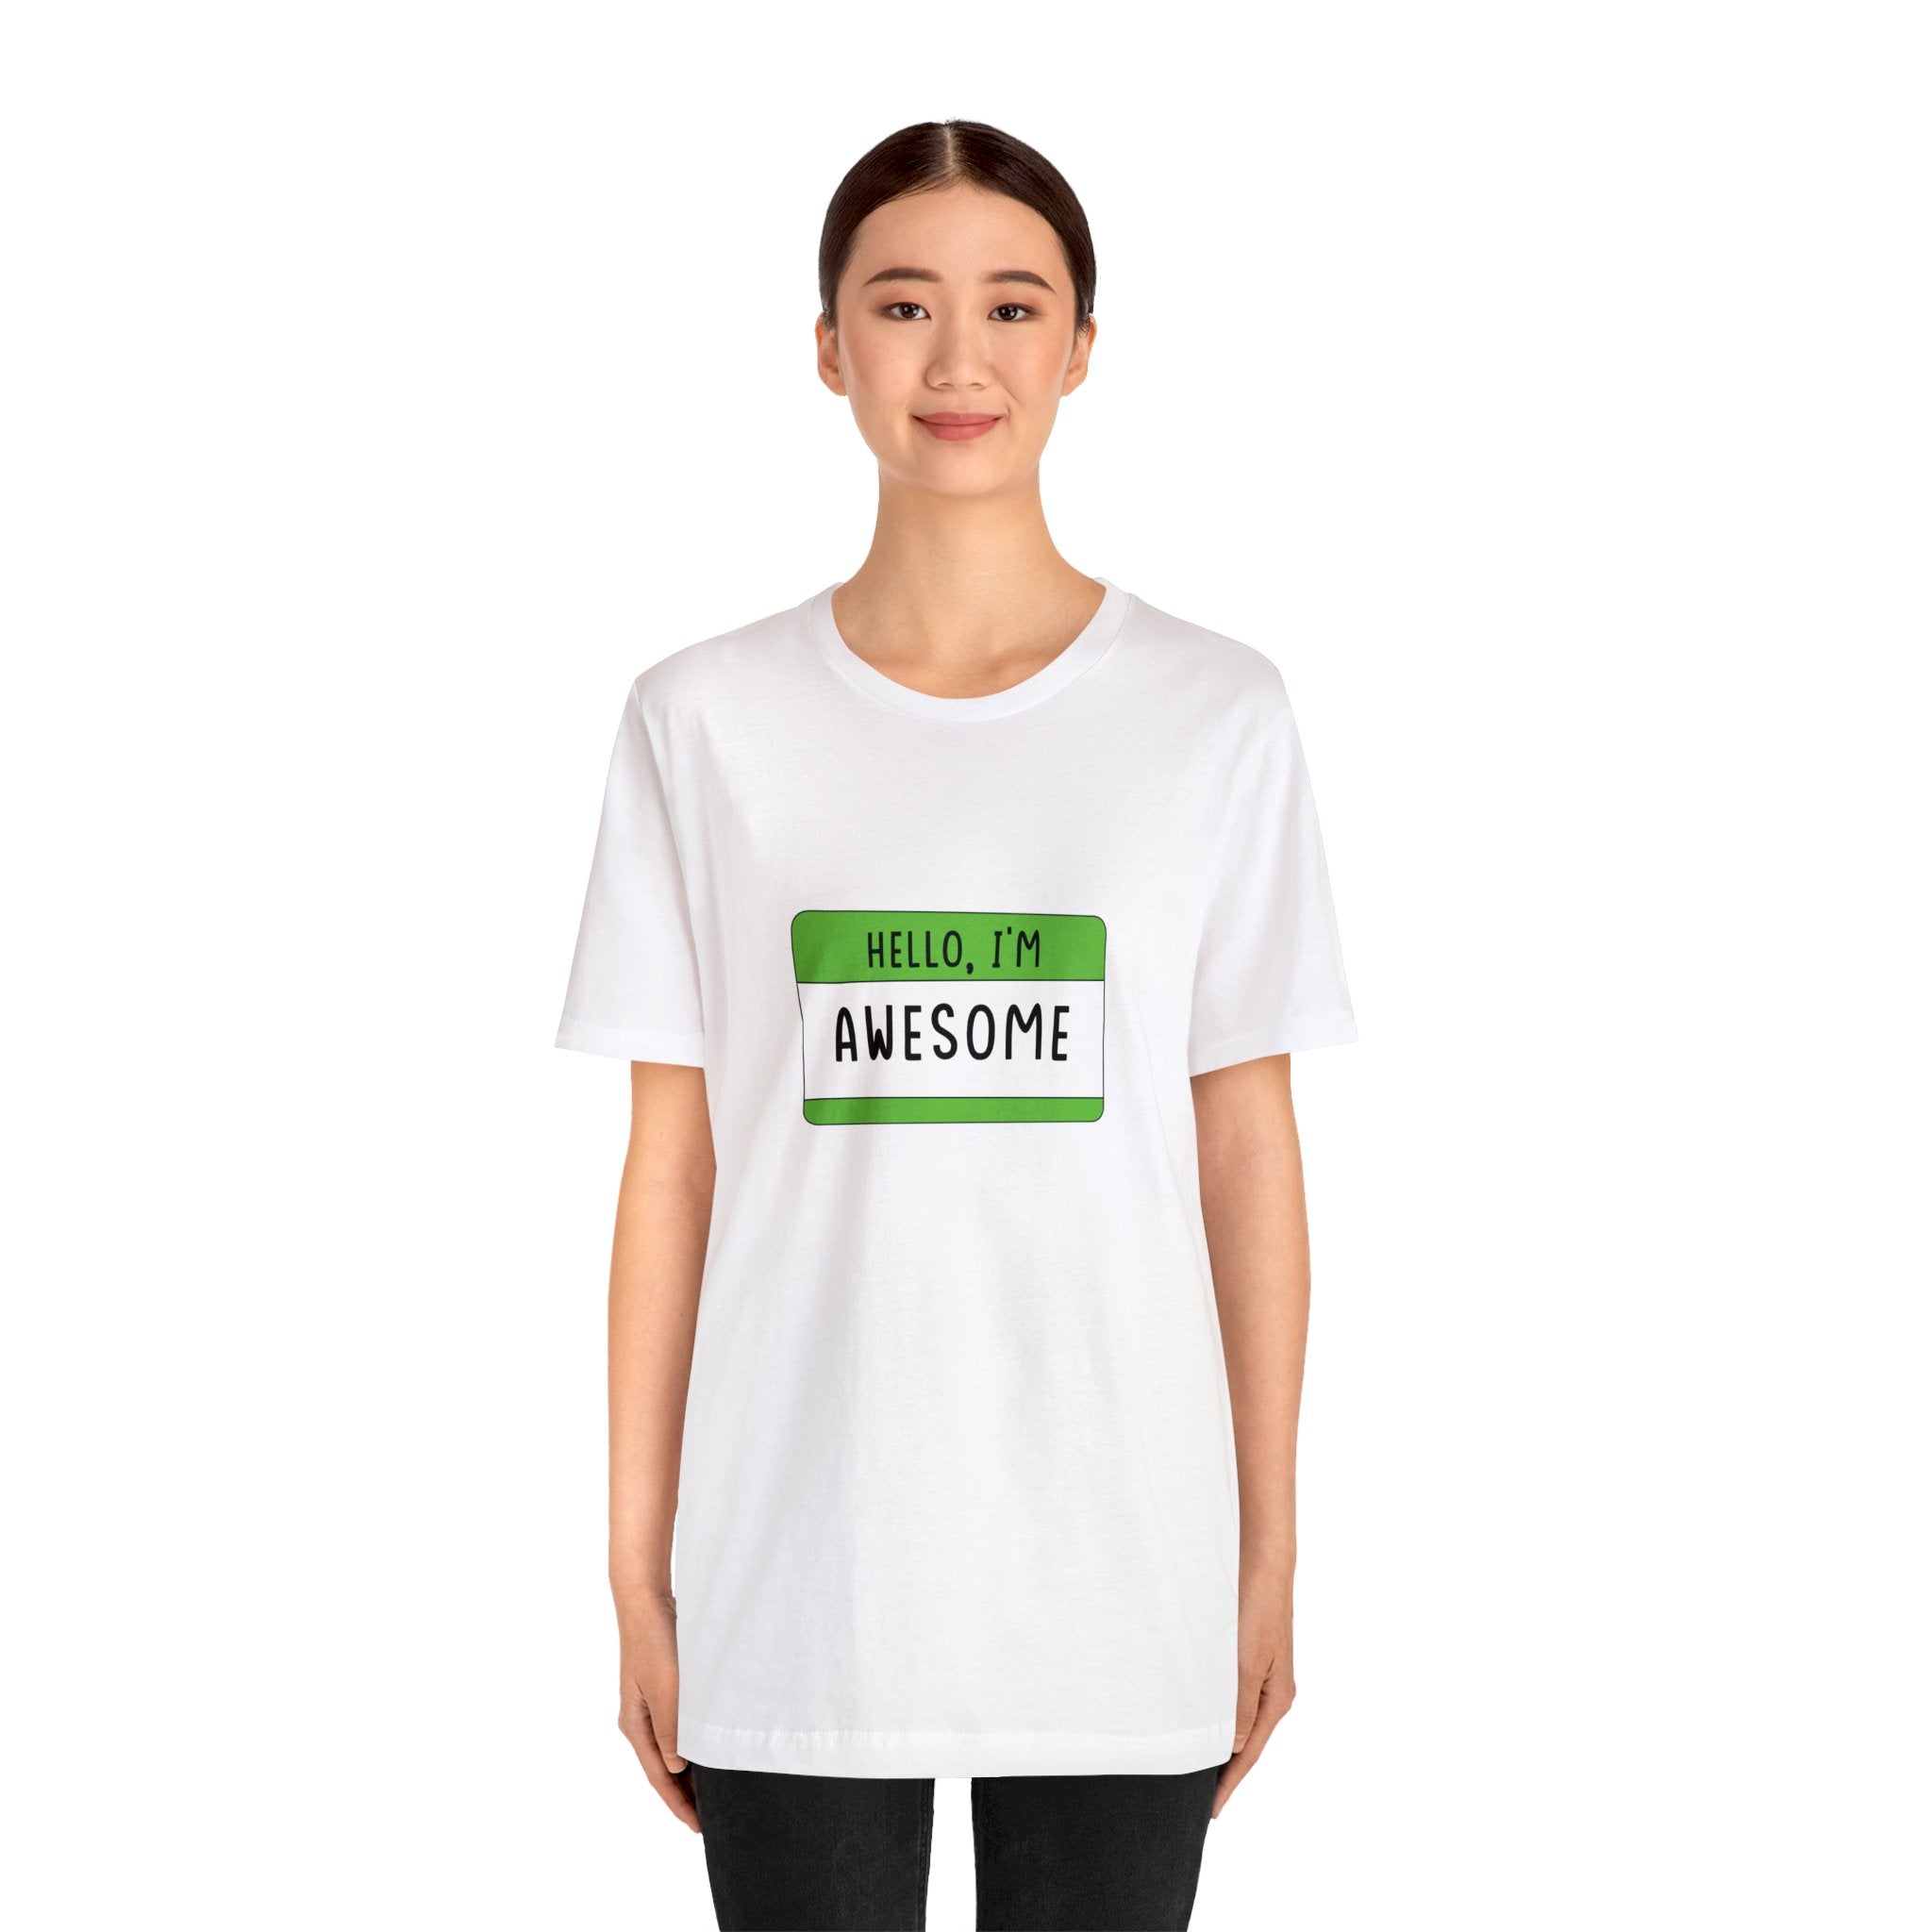 Young woman wearing a Hello, I'm Awesome T-Shirt with a green name tag that says "hello, I'm awesome" designed for geeks and gamers, standing against a white background.